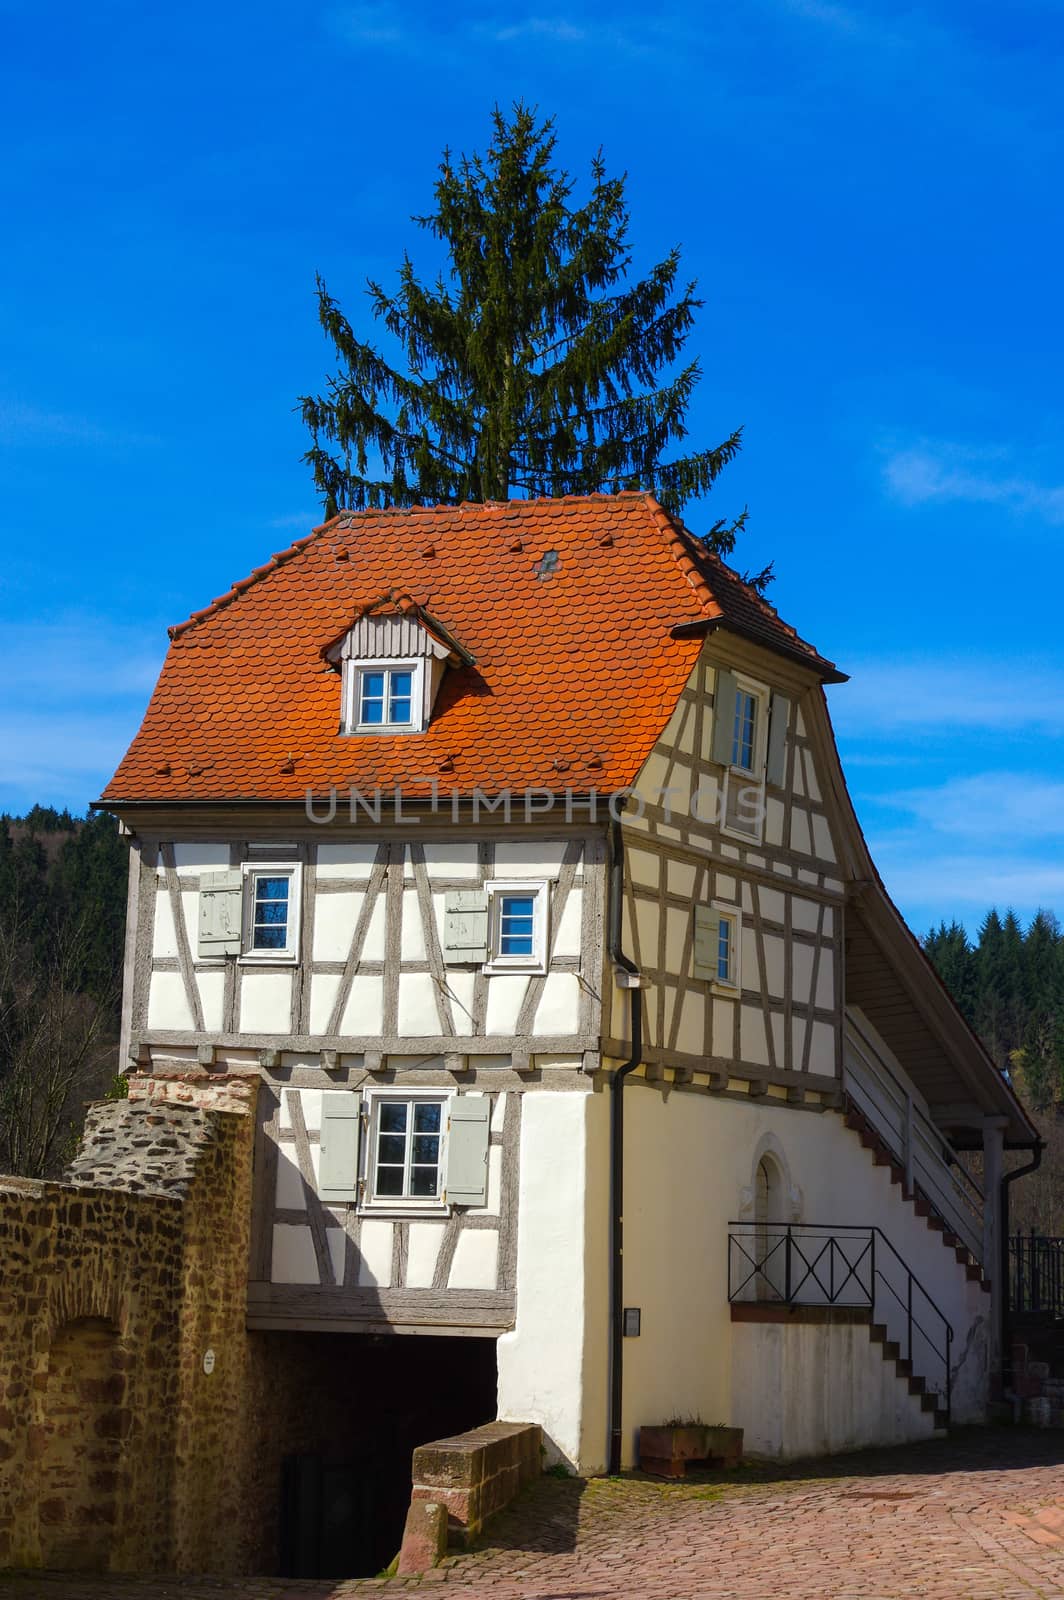 Residential tudor style house , with blue sky in background. Castle Neuenb rg in Germany.